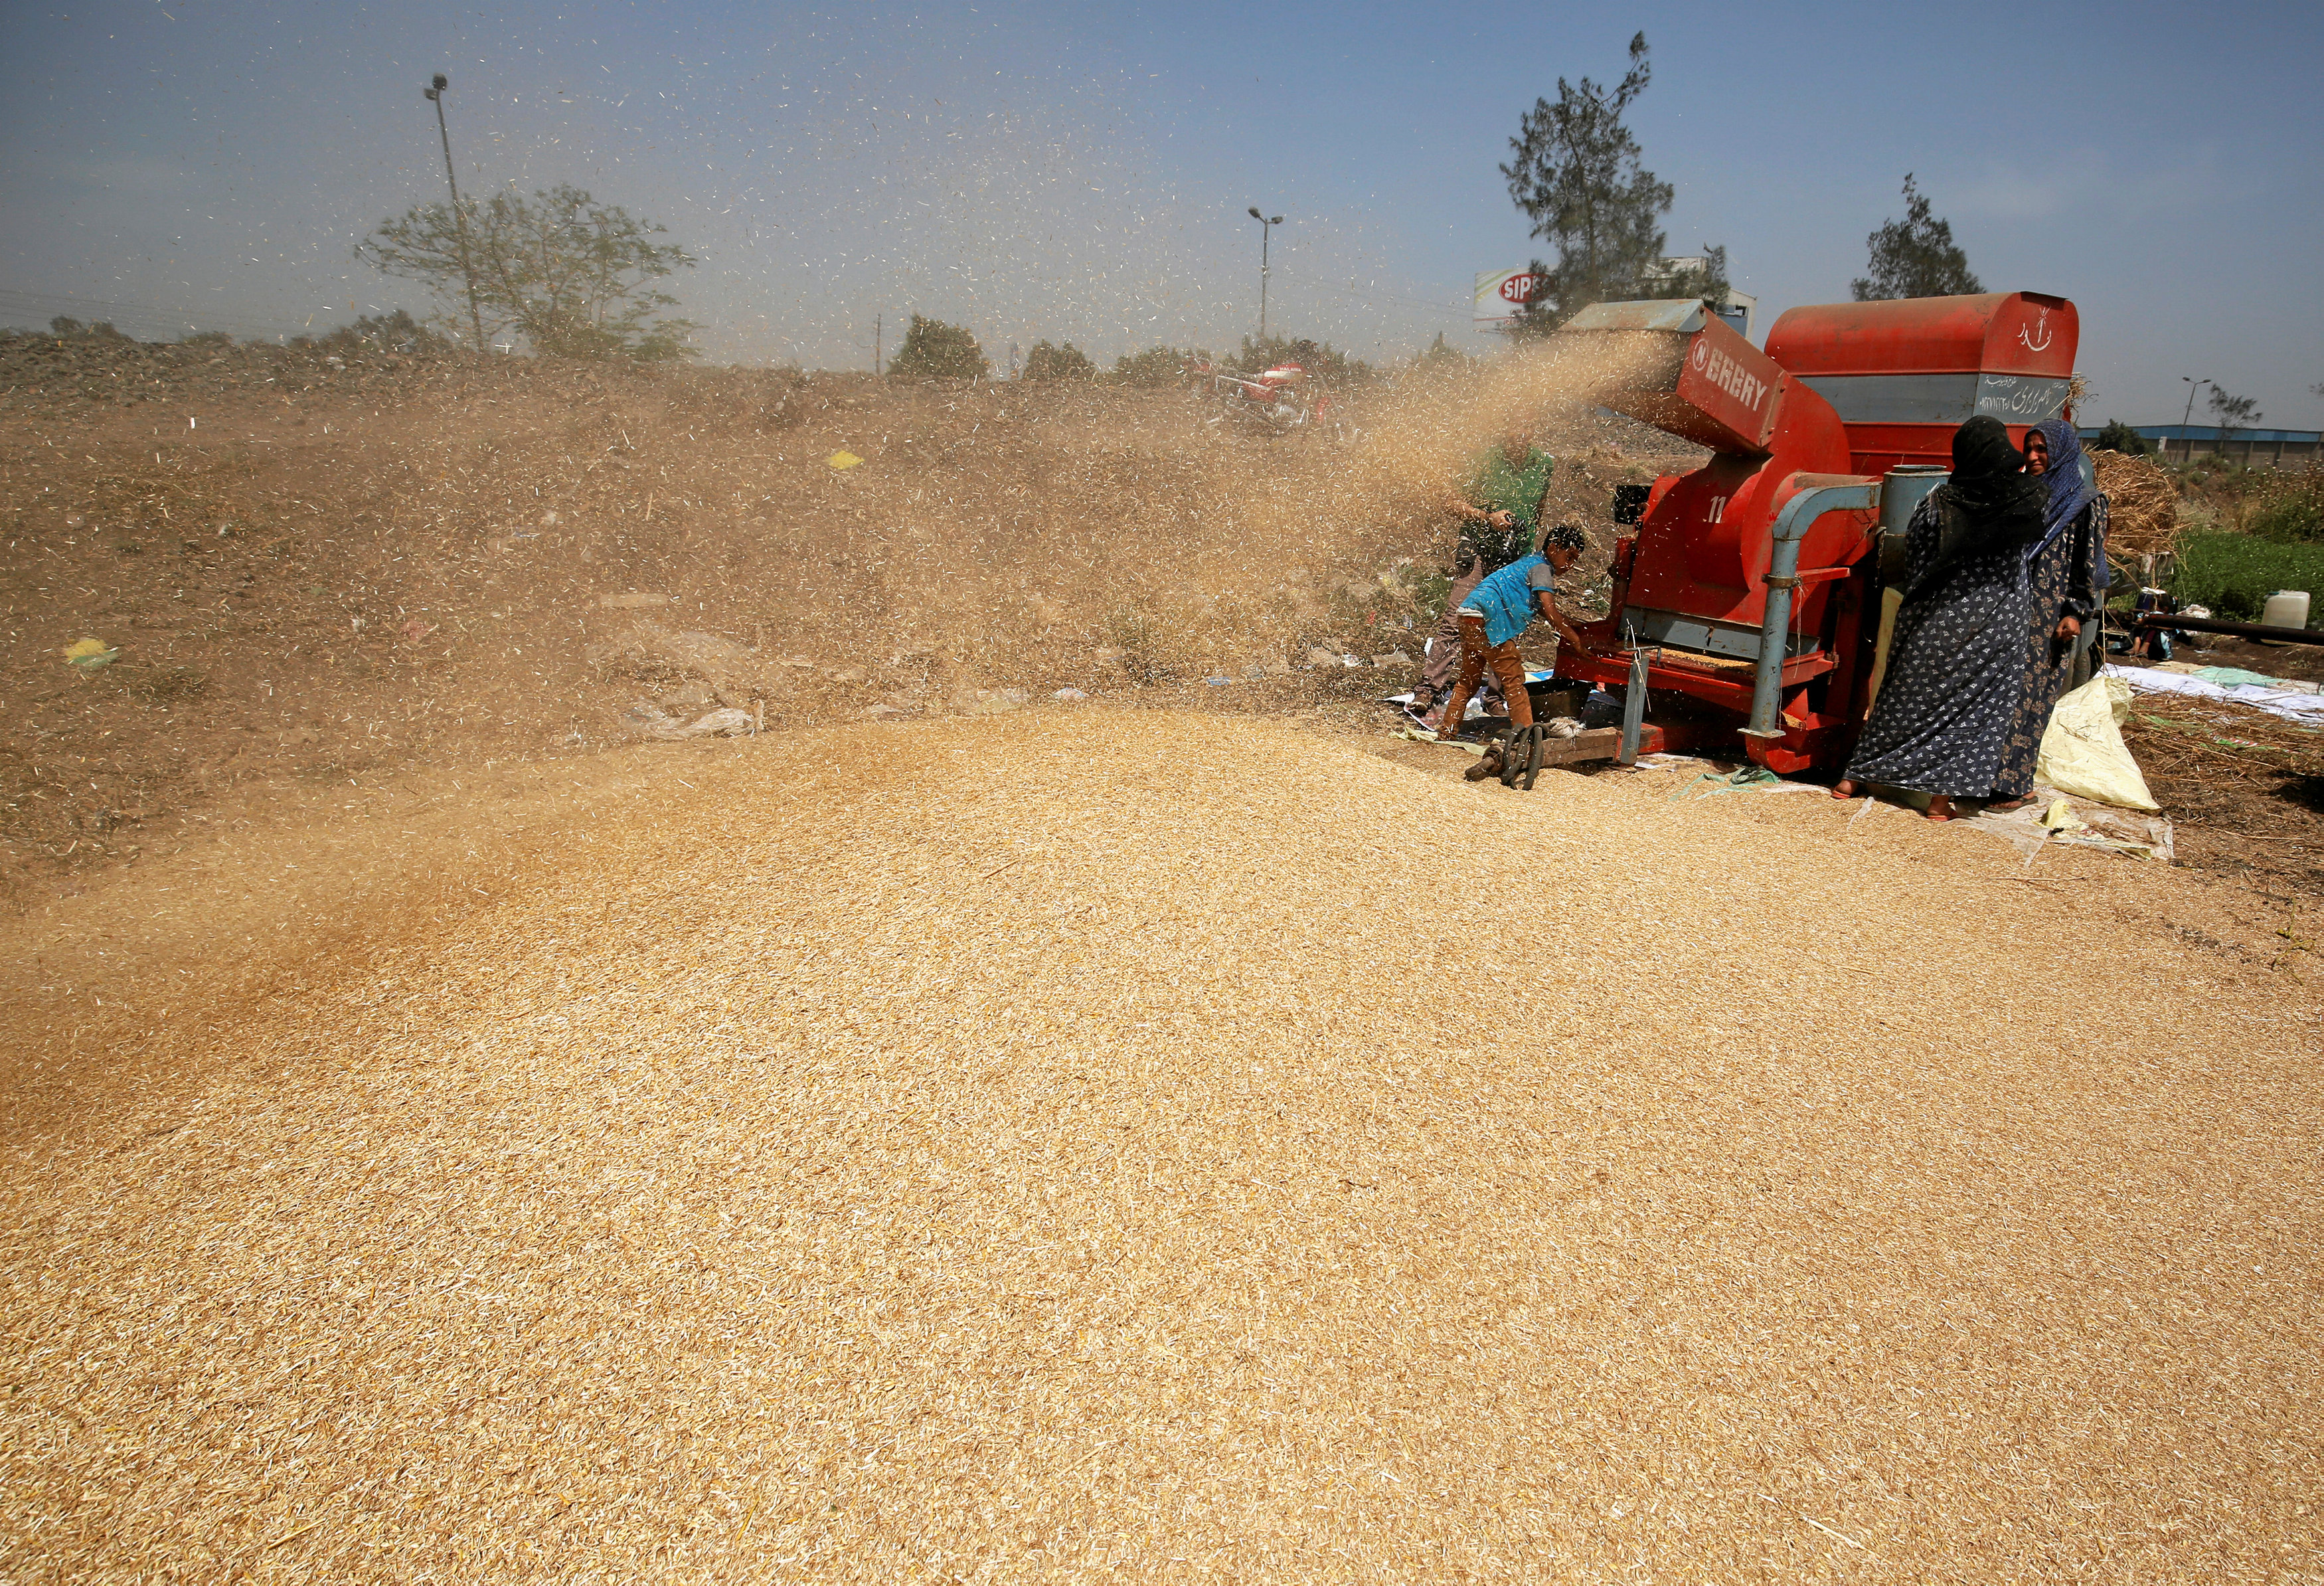 Egypt wheat commission submits corruption report amid calls for minister to resign